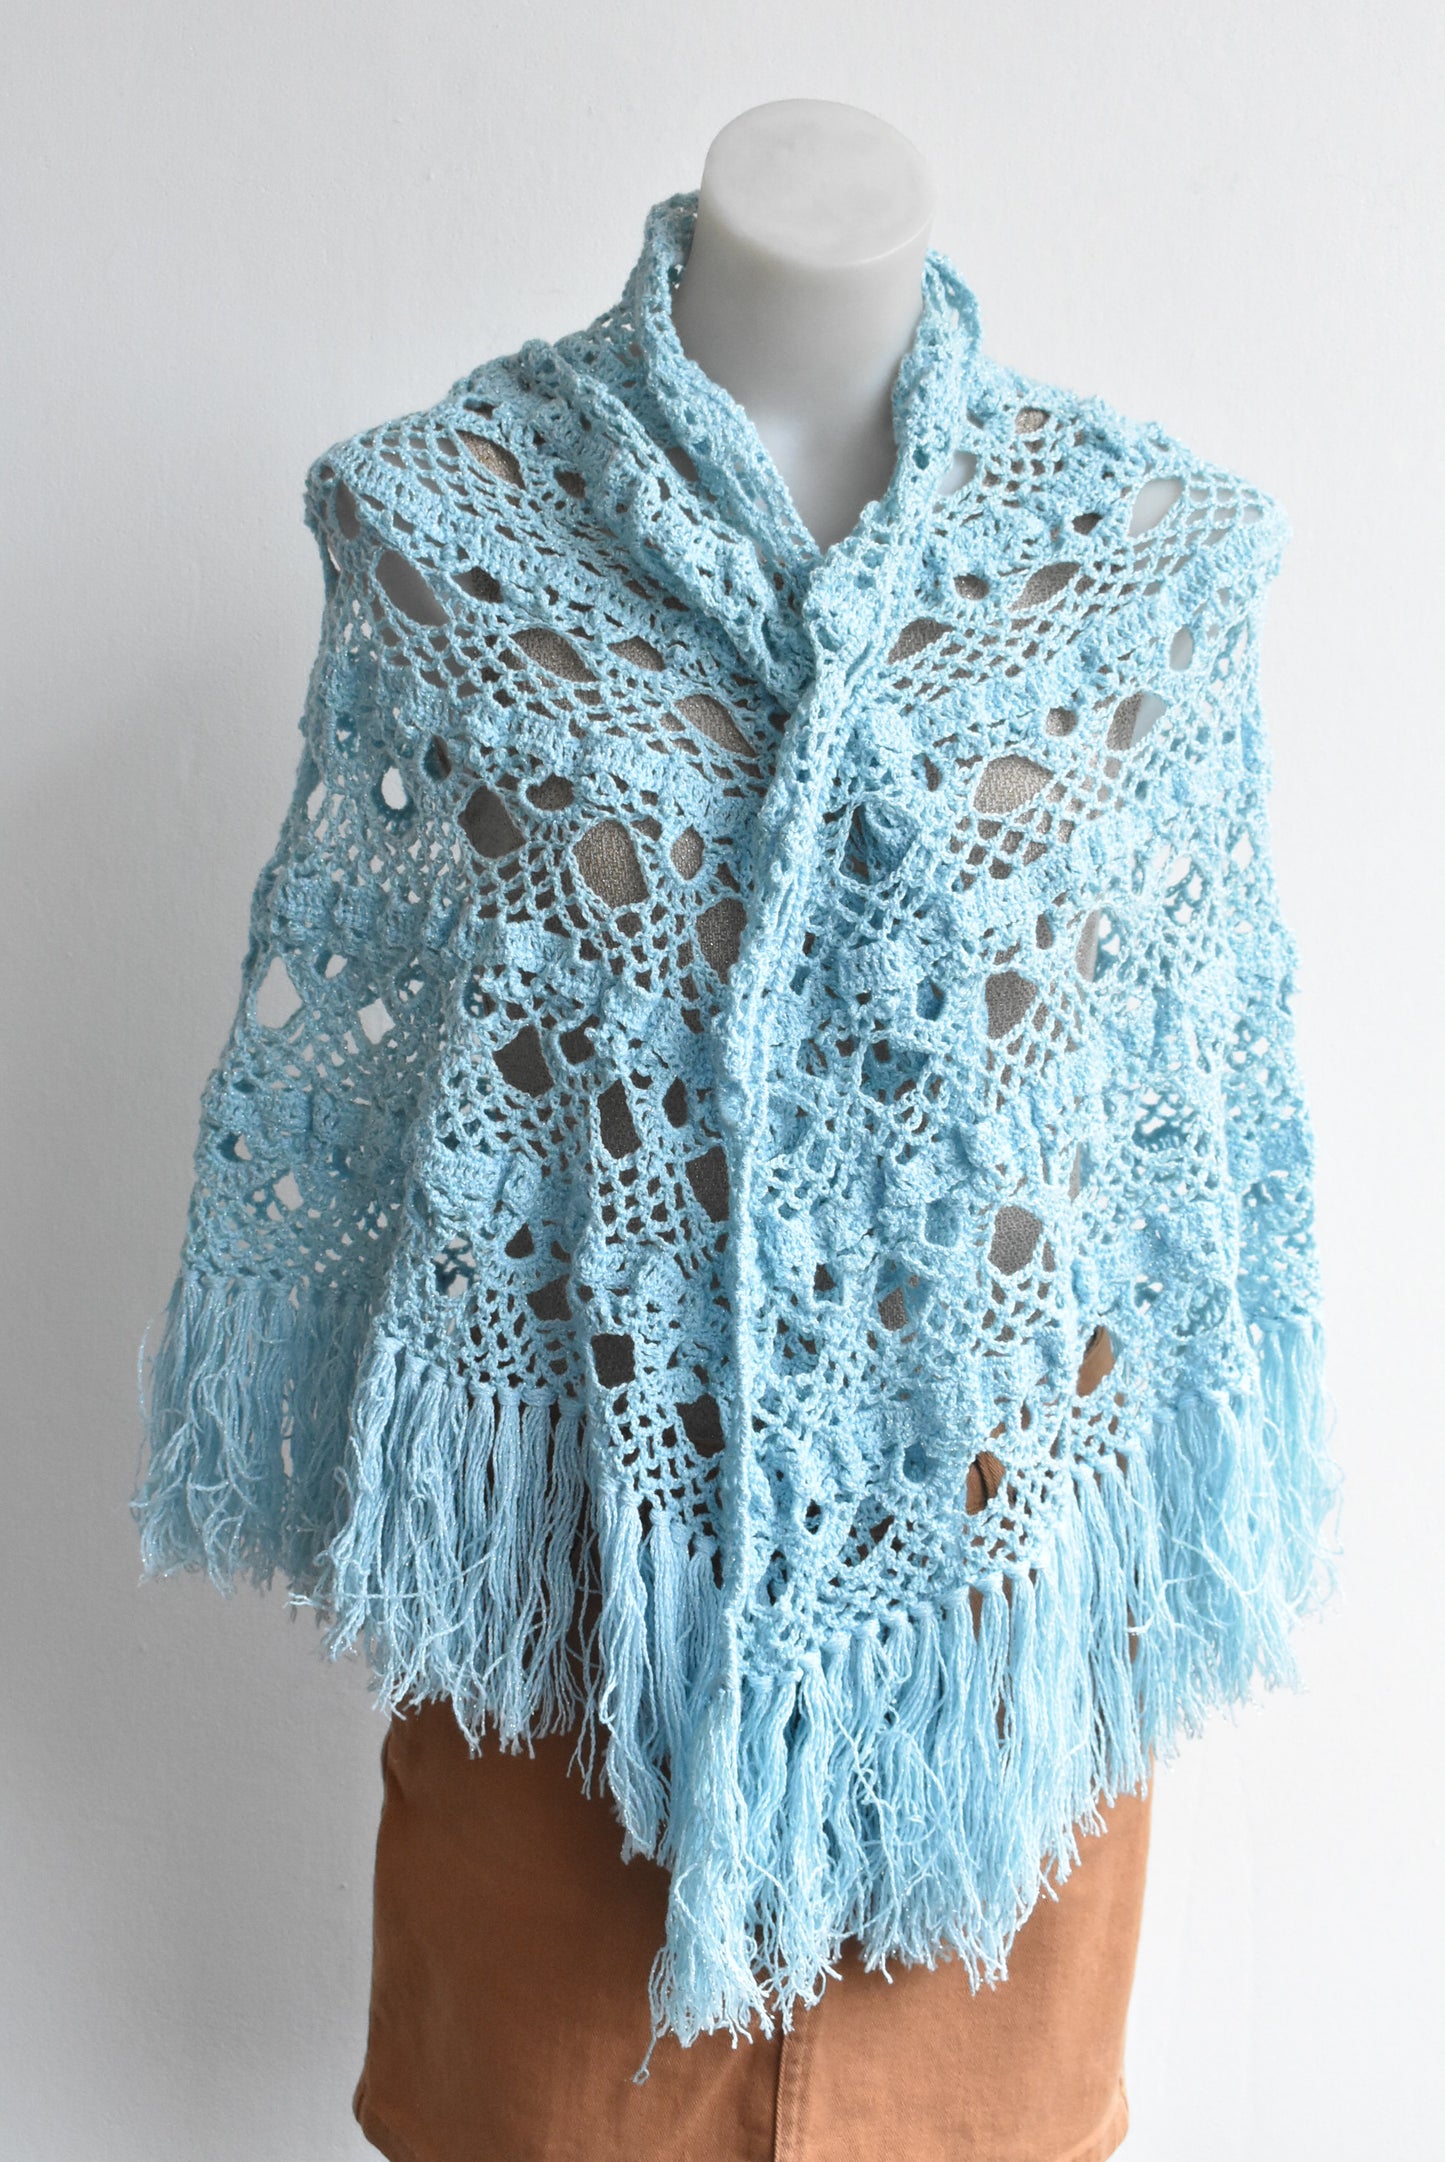 Sparkly hand crocheted shawl